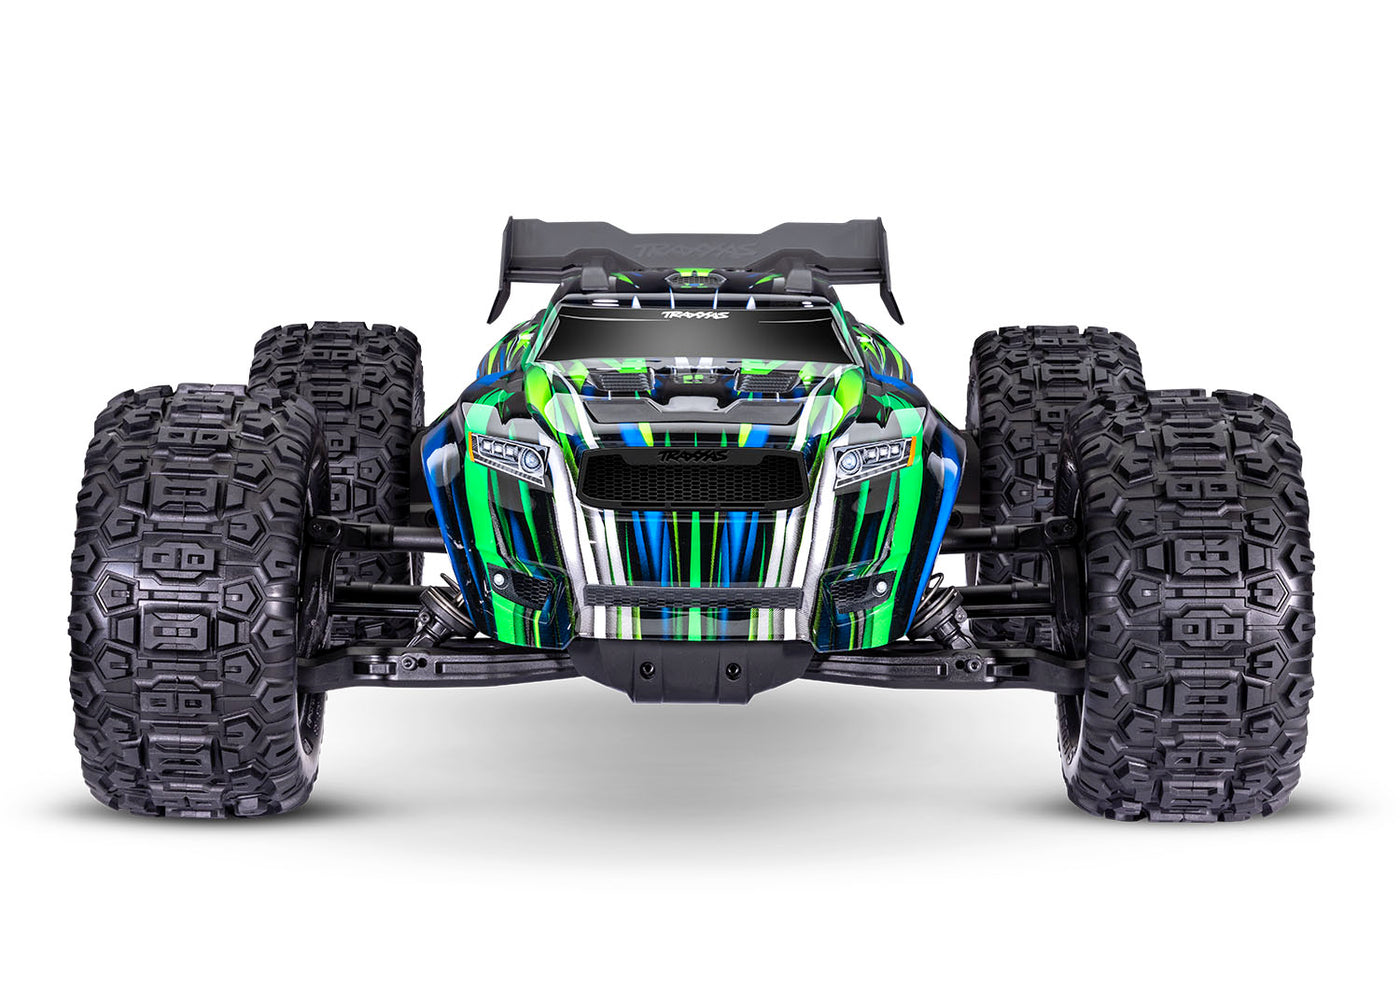 Sledge® 1/8 scale 4WD brushless monster truck with belted tires. Traxxas #95096-4